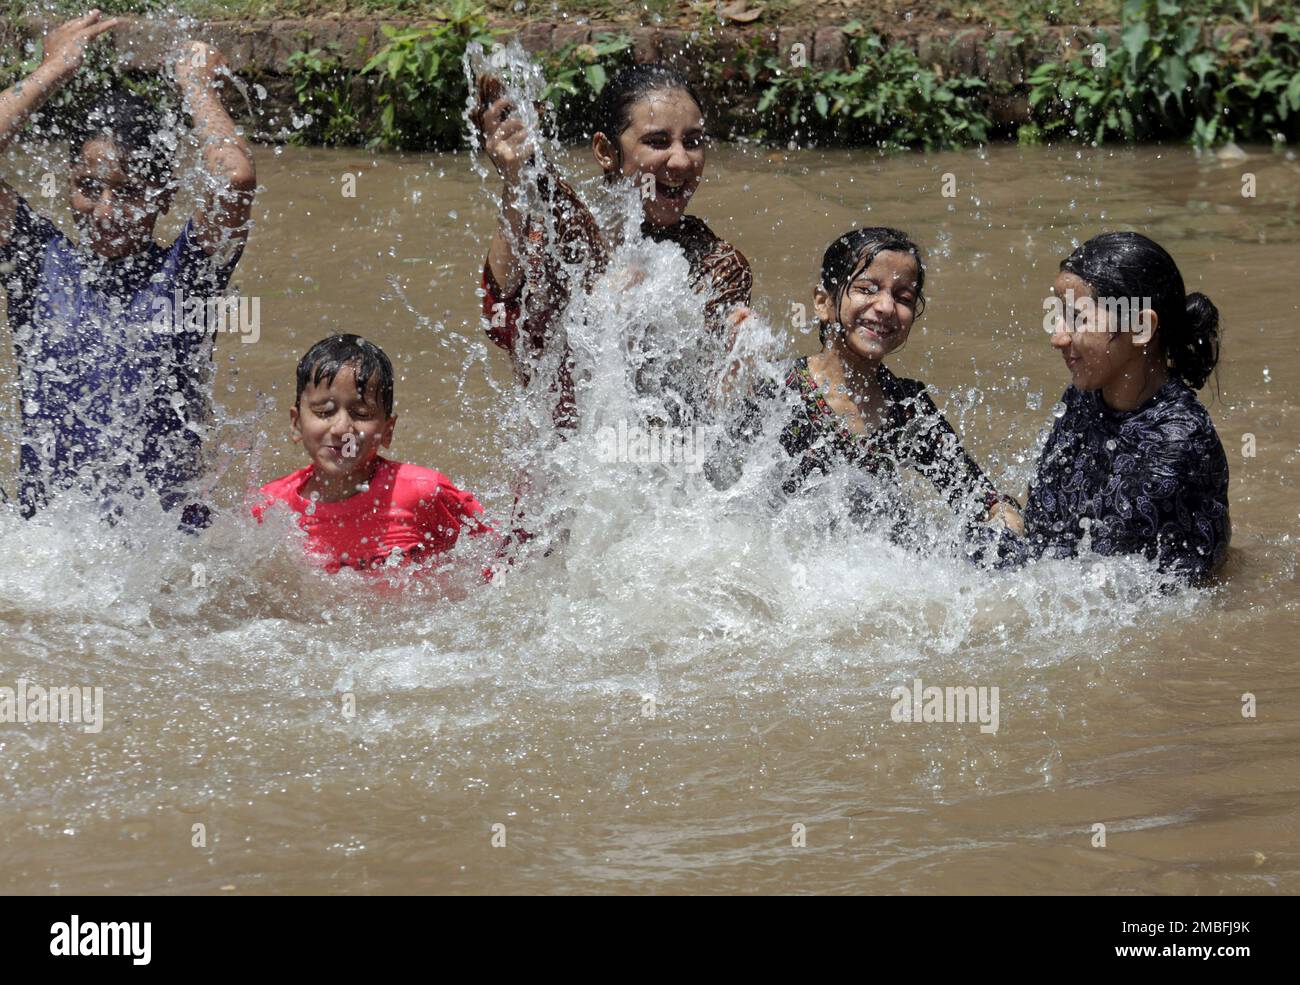 https://c8.alamy.com/comp/2MBFJ9K/children-swim-in-a-canal-to-cool-off-as-temperature-reached-44-c-112-f-in-lahore-pakistan-sunday-may-15-2022-ap-photokm-chaudary-2MBFJ9K.jpg